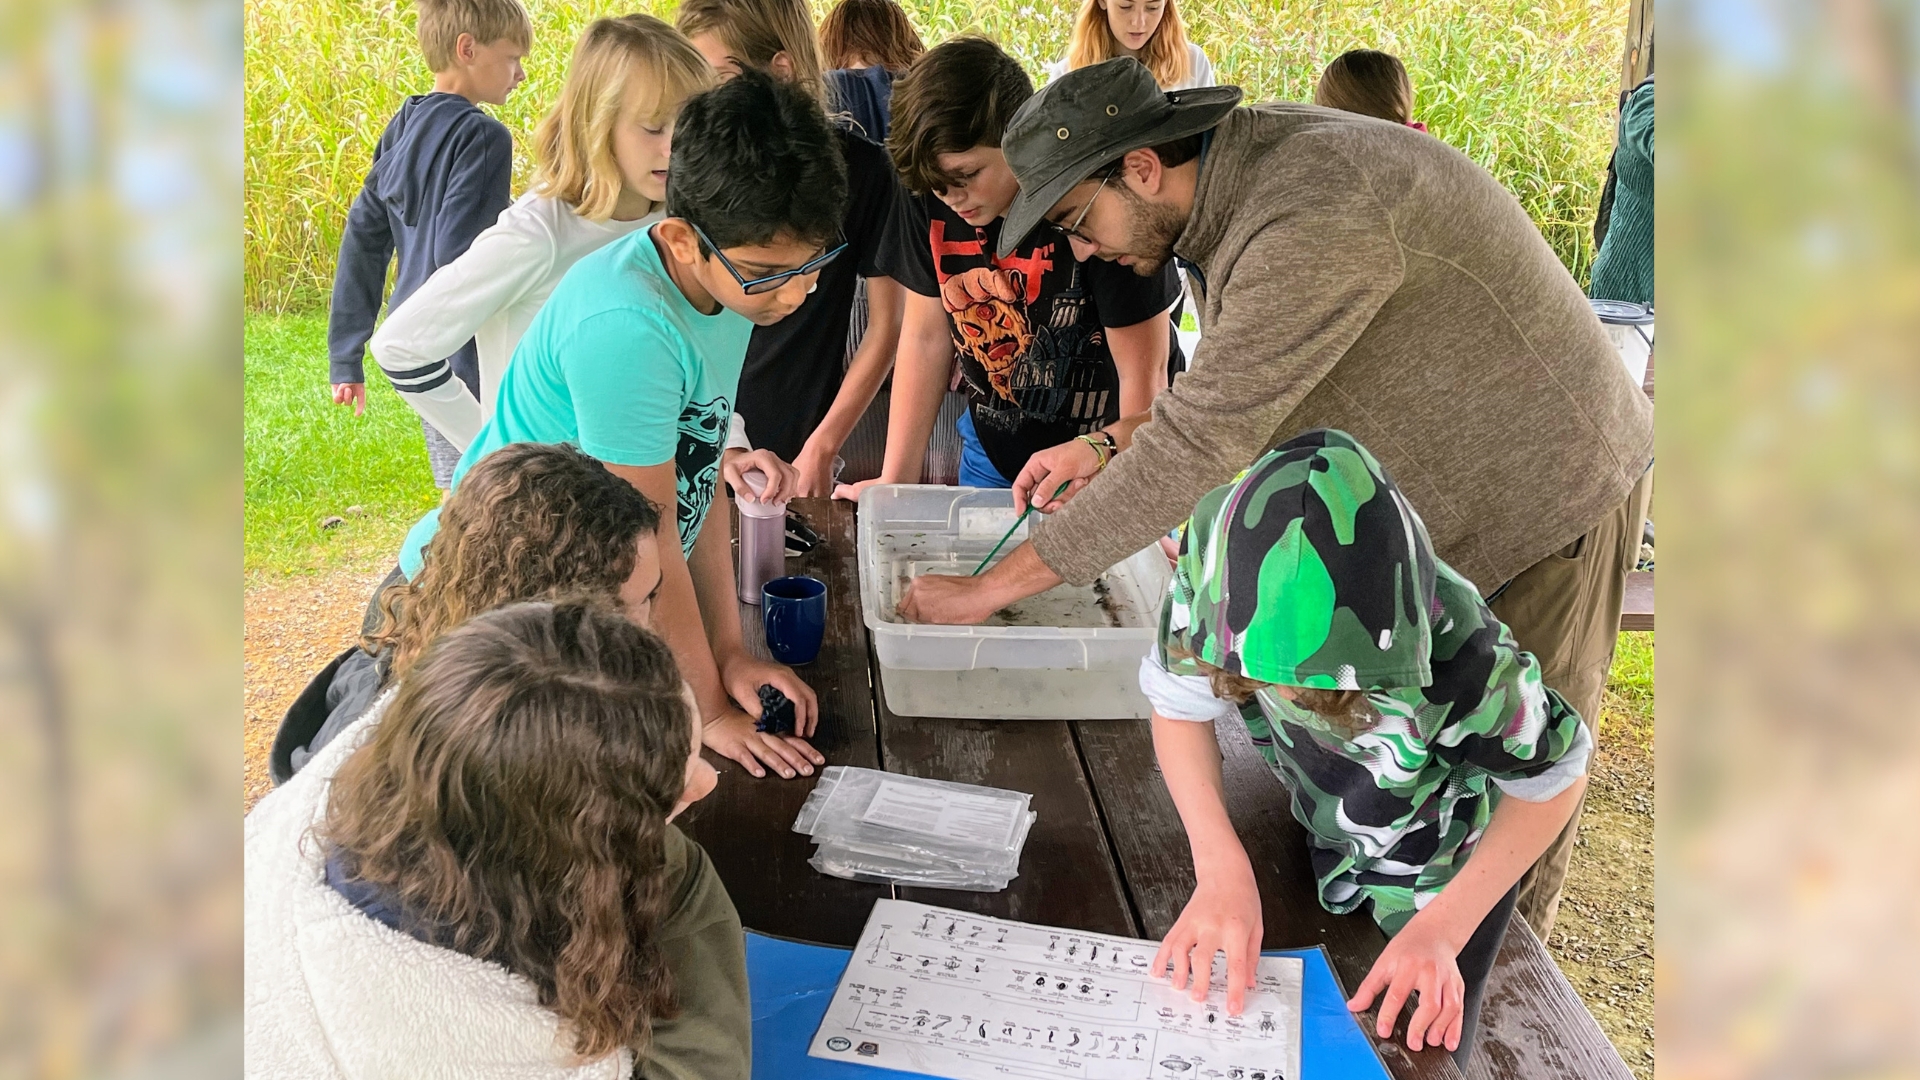 Leader Jake and students from the Delta Program examine macroinvertebrate specimens during a group program.